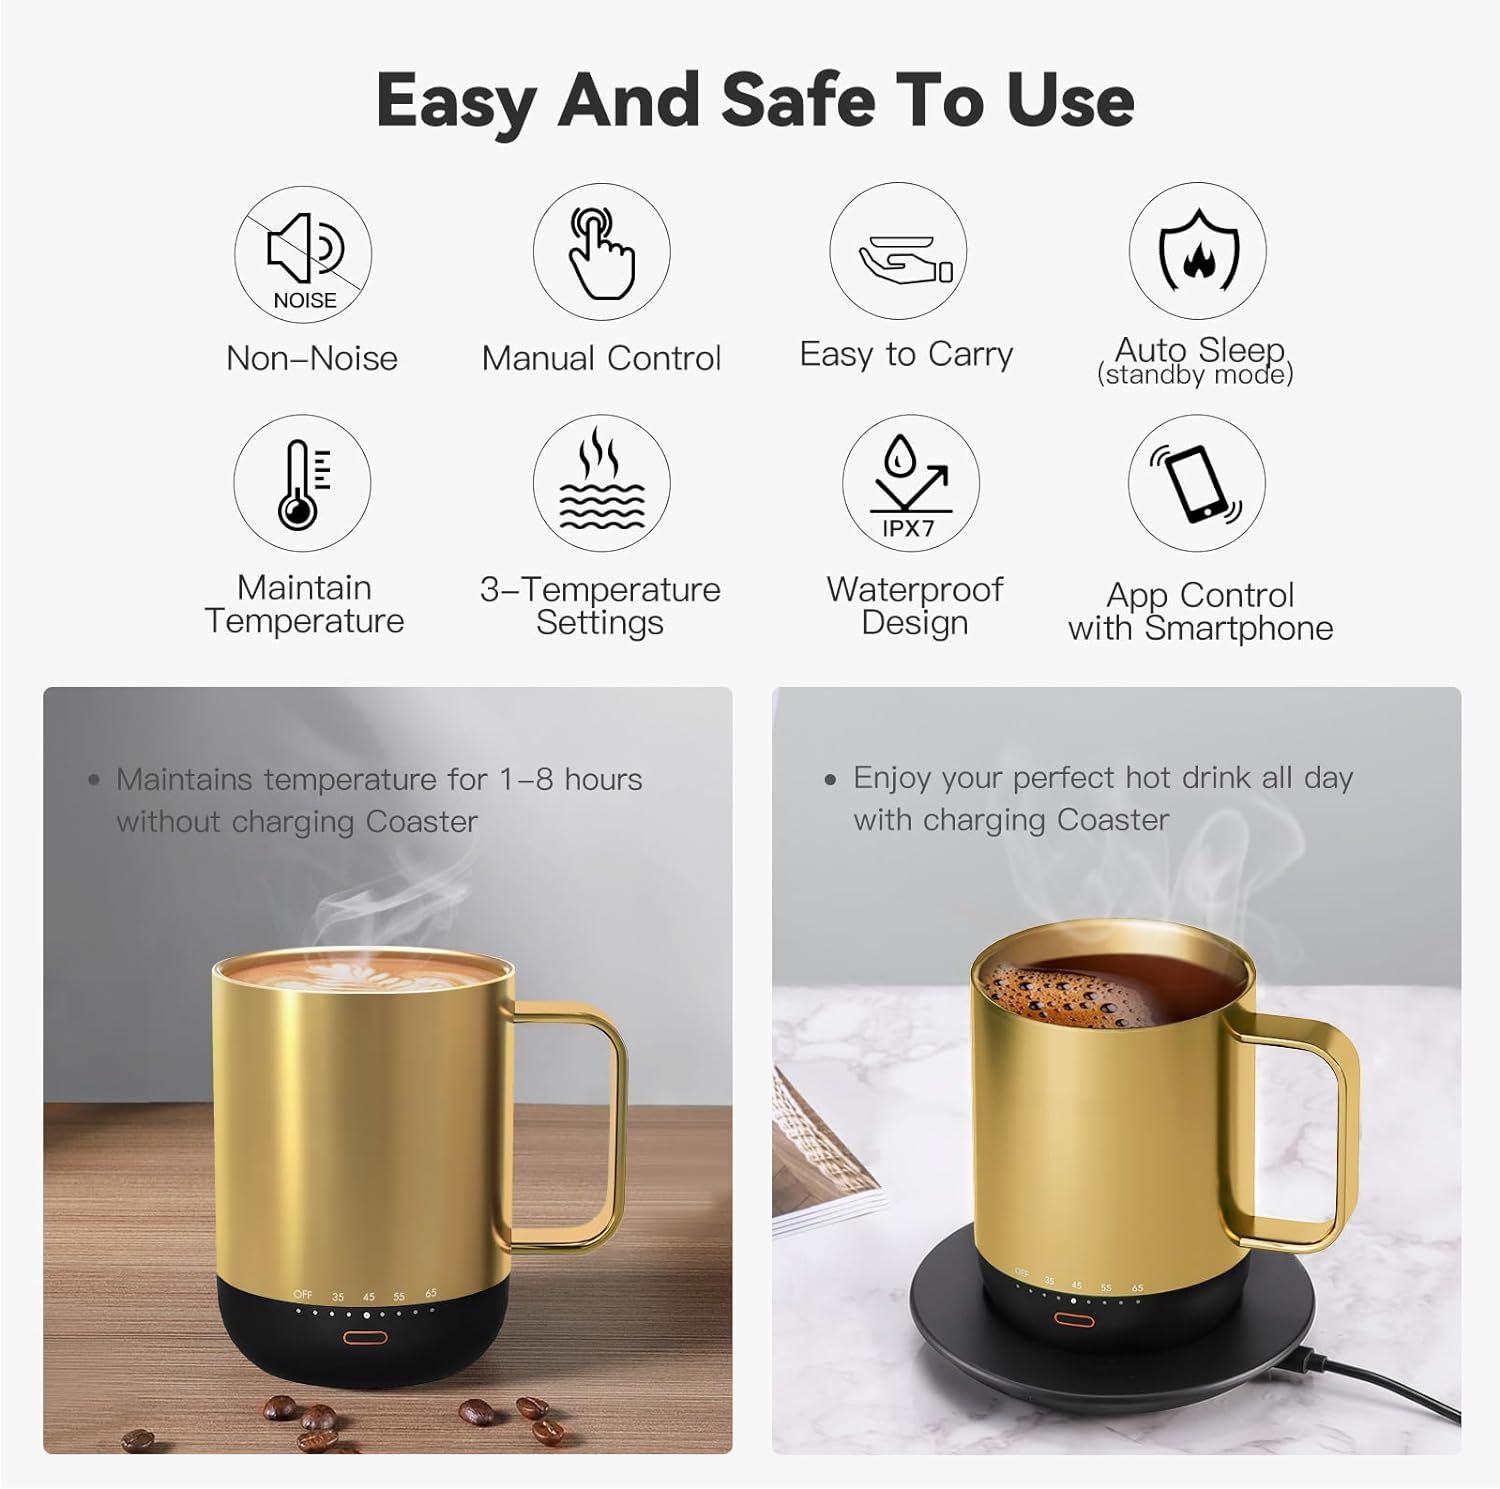 Ember Temperature Control Smart Mug 2, 14 Oz, App-Controlled Heated Coffee  Mug with 80 Min Battery Life and Improved Design, Gray